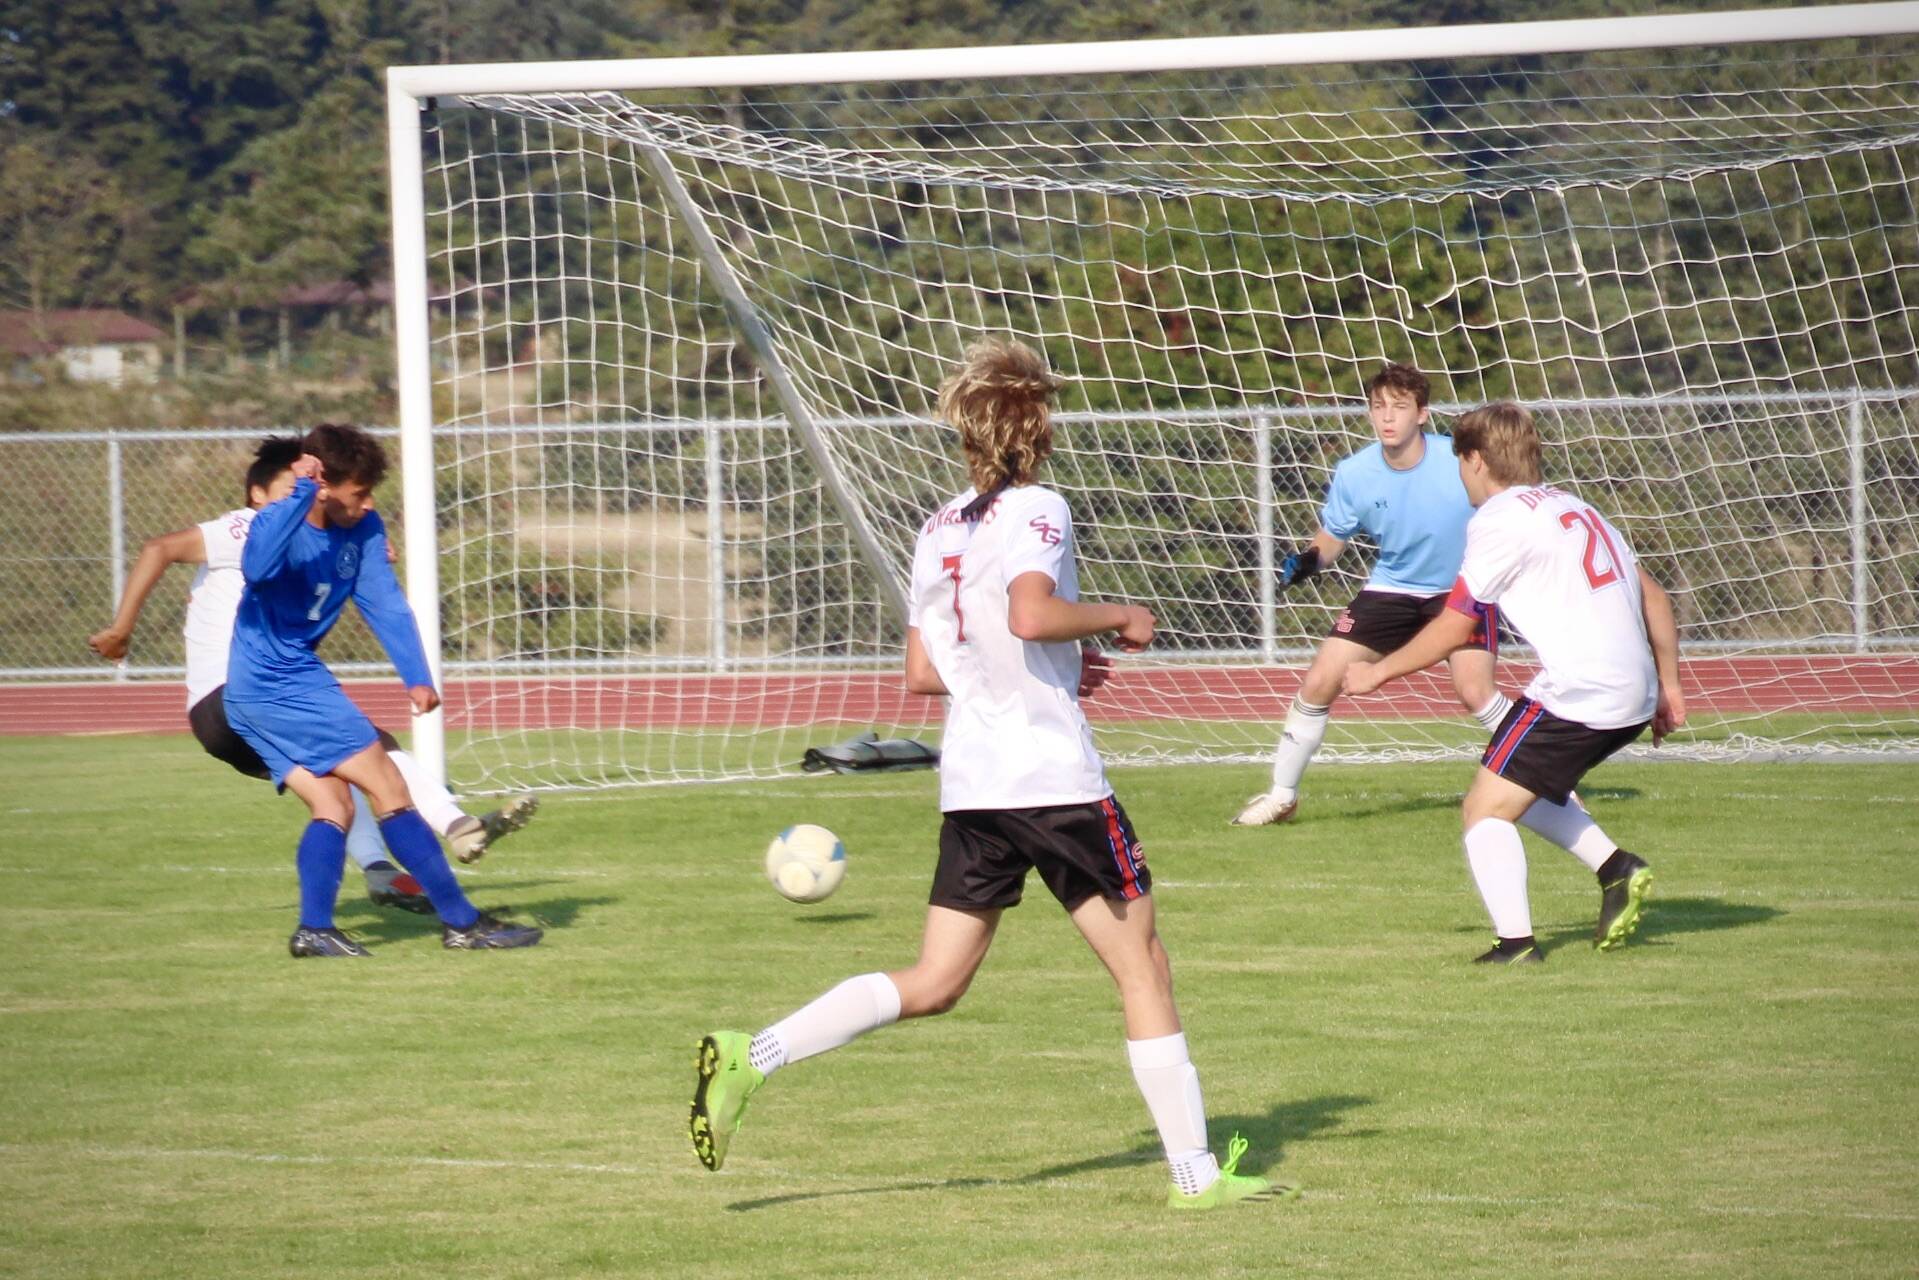 Corey Wiscomb photo.
Joaquin Shanks Morales penetrates the defense and fires a shot to the back of the net.